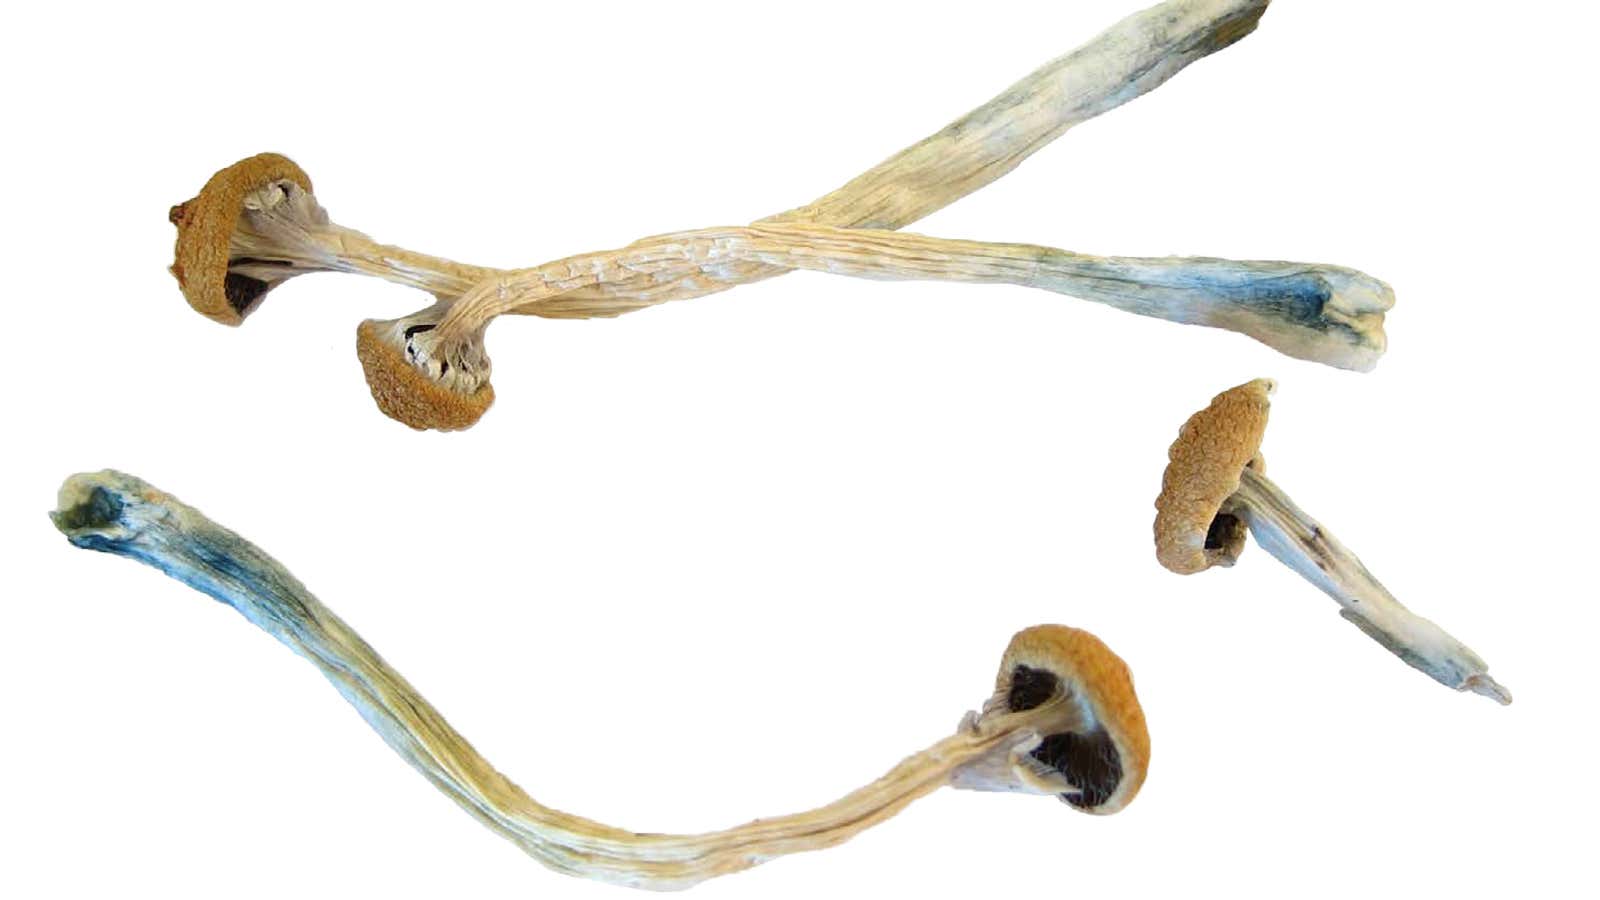 Psilocybin or “magic mushrooms” are seen in an undated photo provided by the U.S. Drug Enforcement Agency (DEA) in Washington.